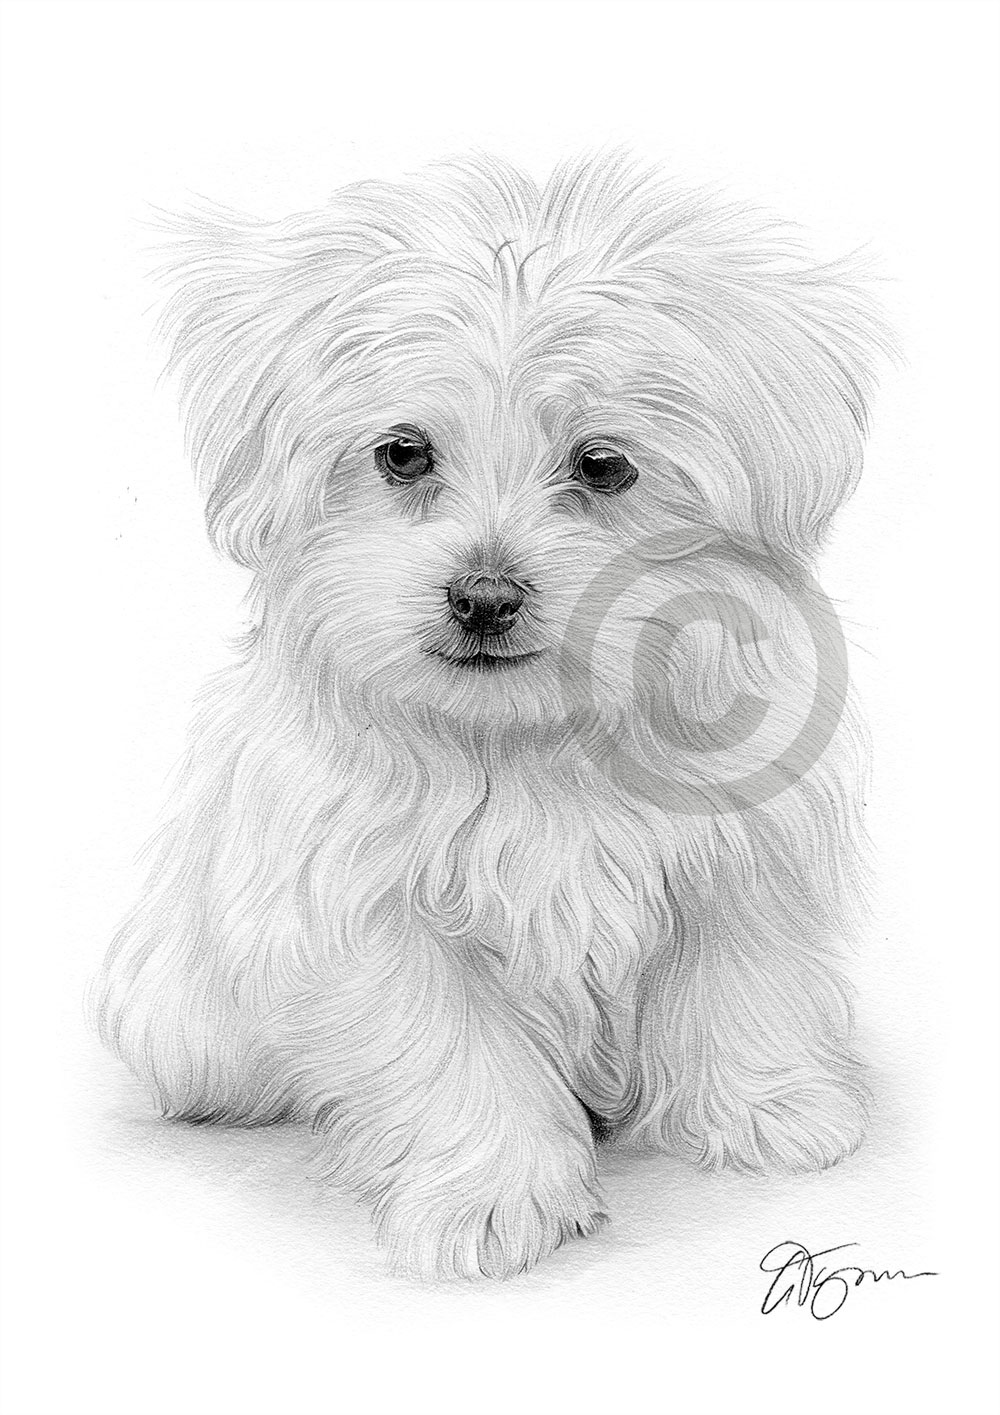 Pencil drawing of a Maltese puppy by artist Gary Tymon